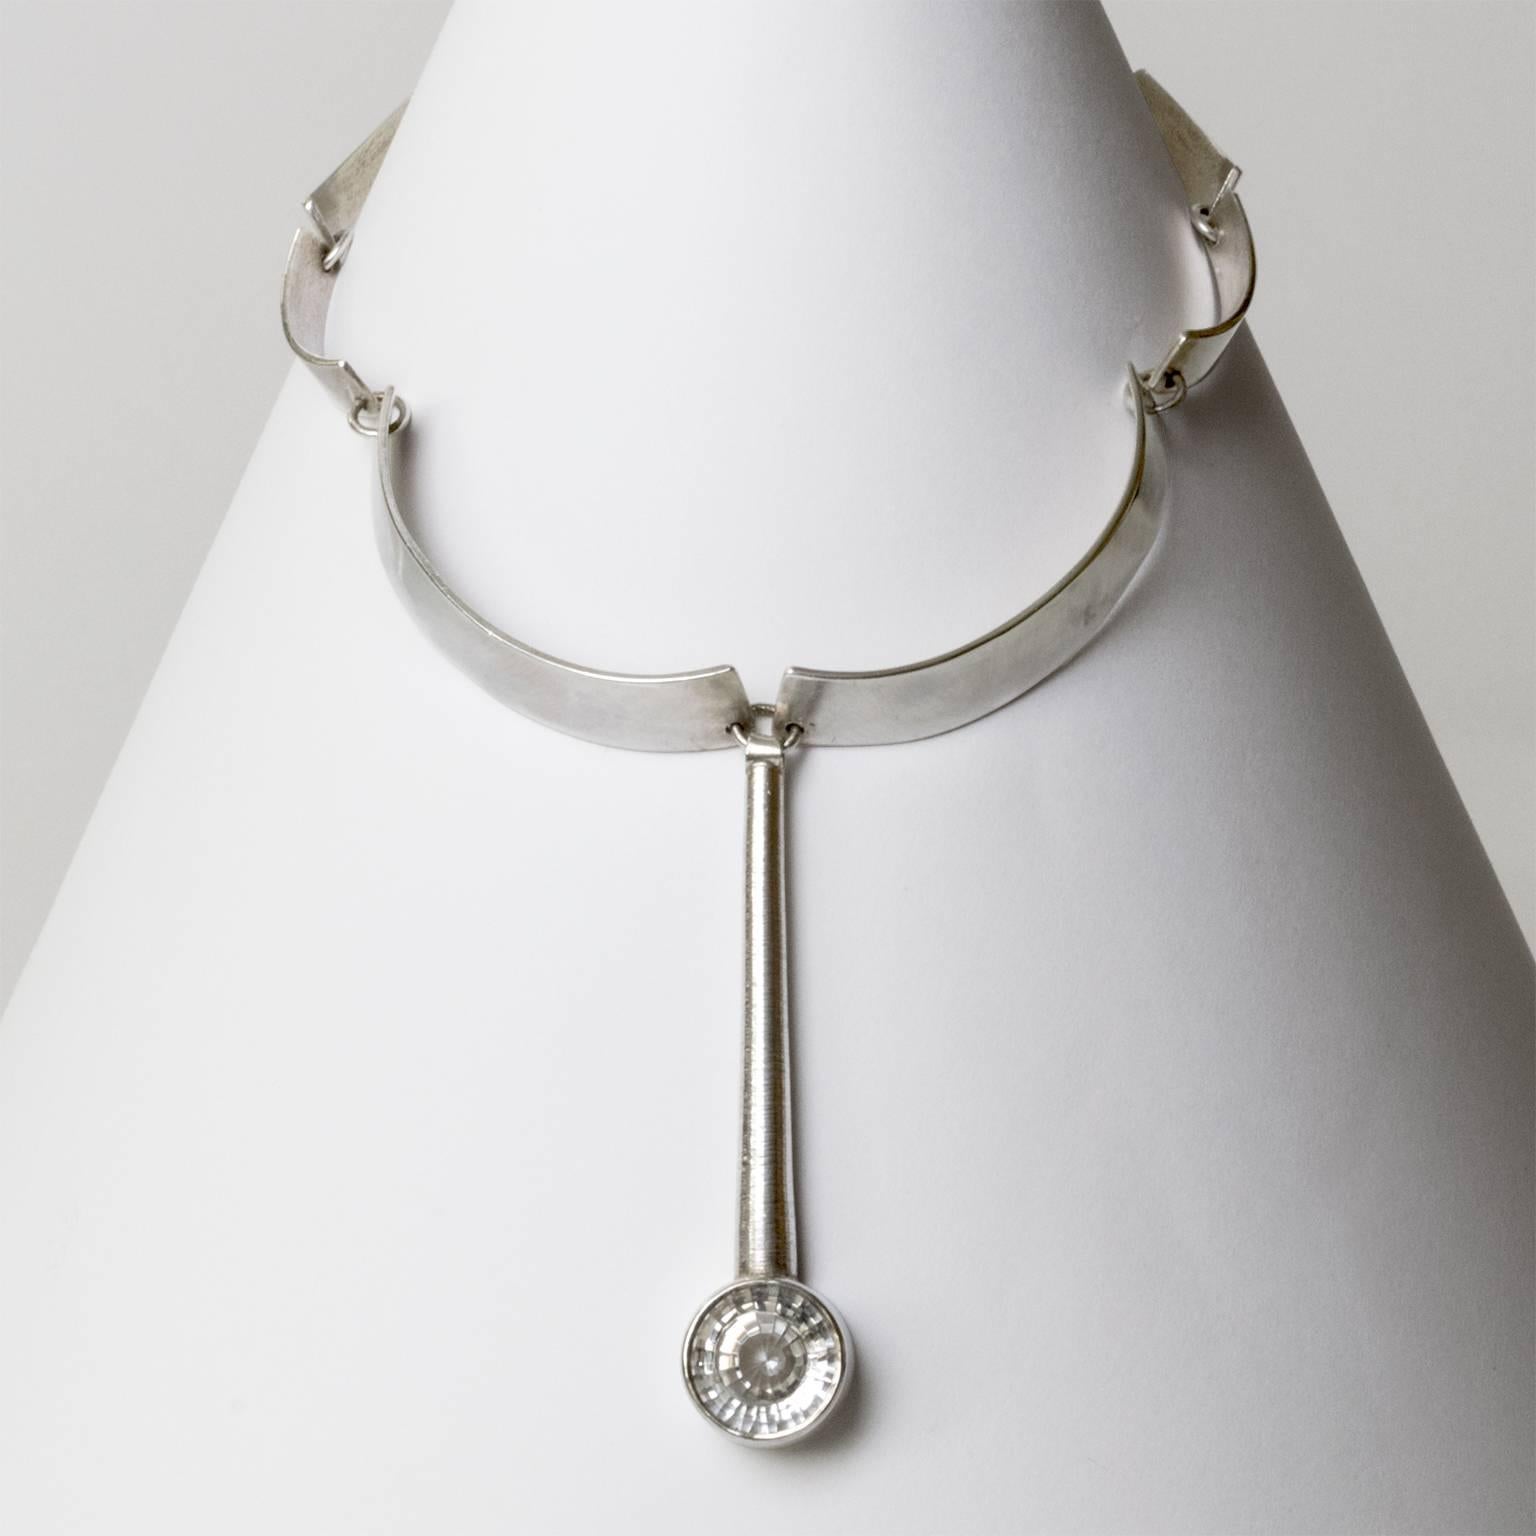 Scandinavian modern silver necklace on curved link chain and a rock crystal pendant. Designed by Alstrom, Stockholm, Sweden, 1960s.
Chain length: 14